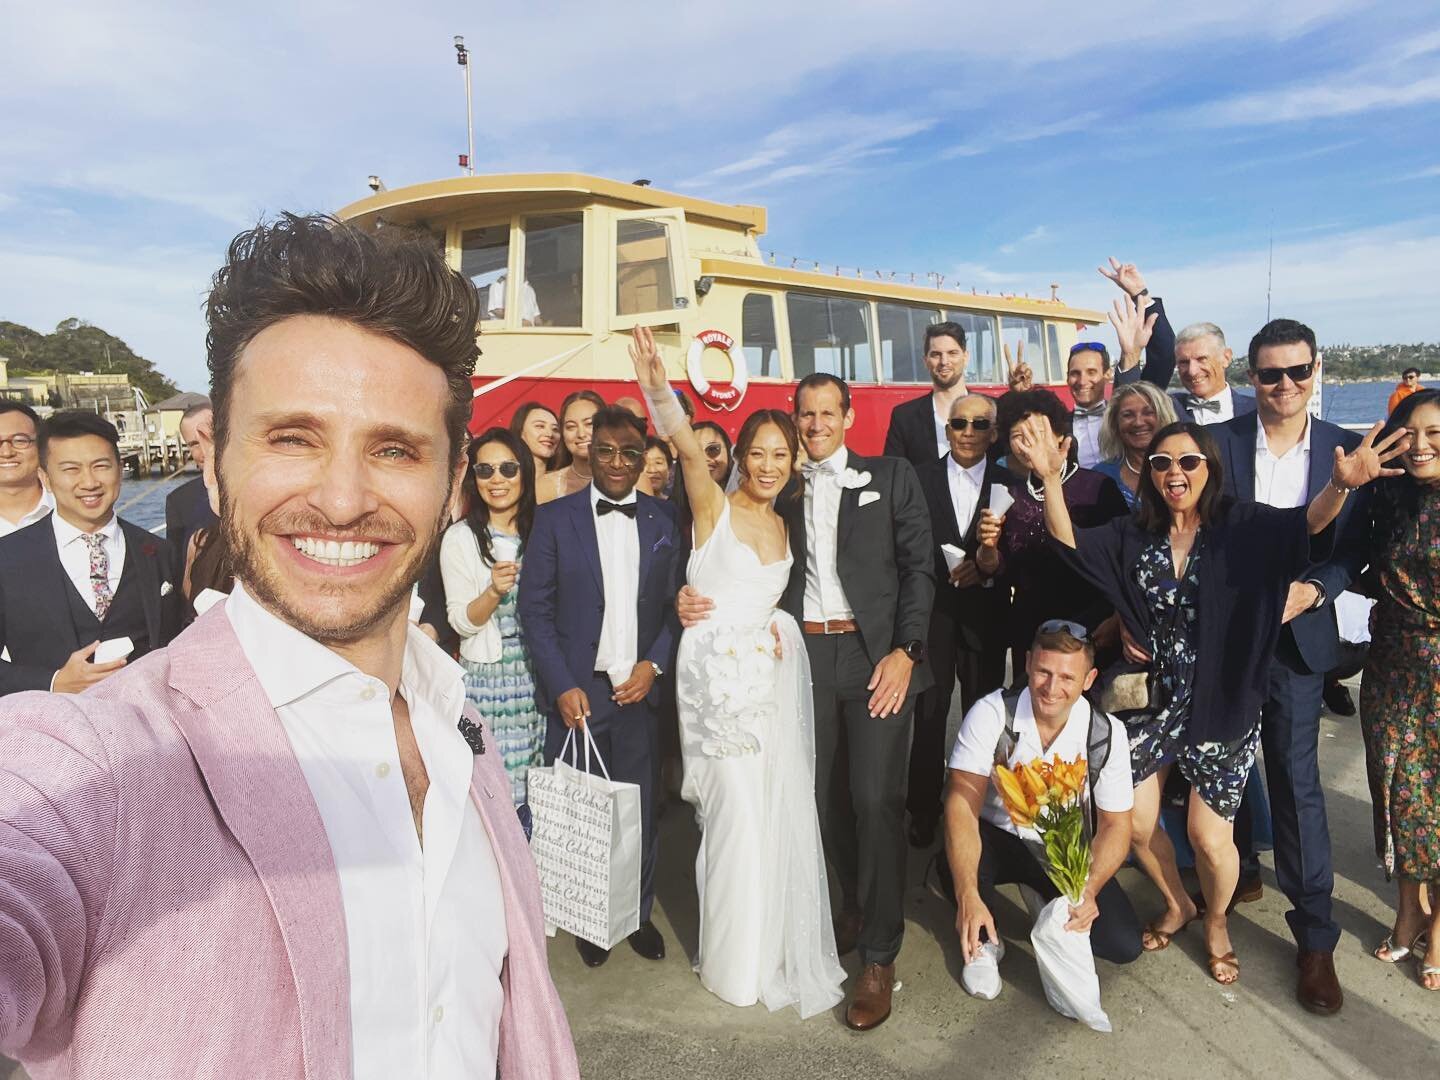 What a day - gorgeous ☀️ Lucky newlyweds Jie &amp; Tobi, lucked out this sunny Saturday!!! Congratulations to the newlyweds!!! 🙌🏽🎉☀️ 
.
.
#married #newlyweds #bestday #instawedding #sydneyharbour #harbourwedding #sydneycelebrant